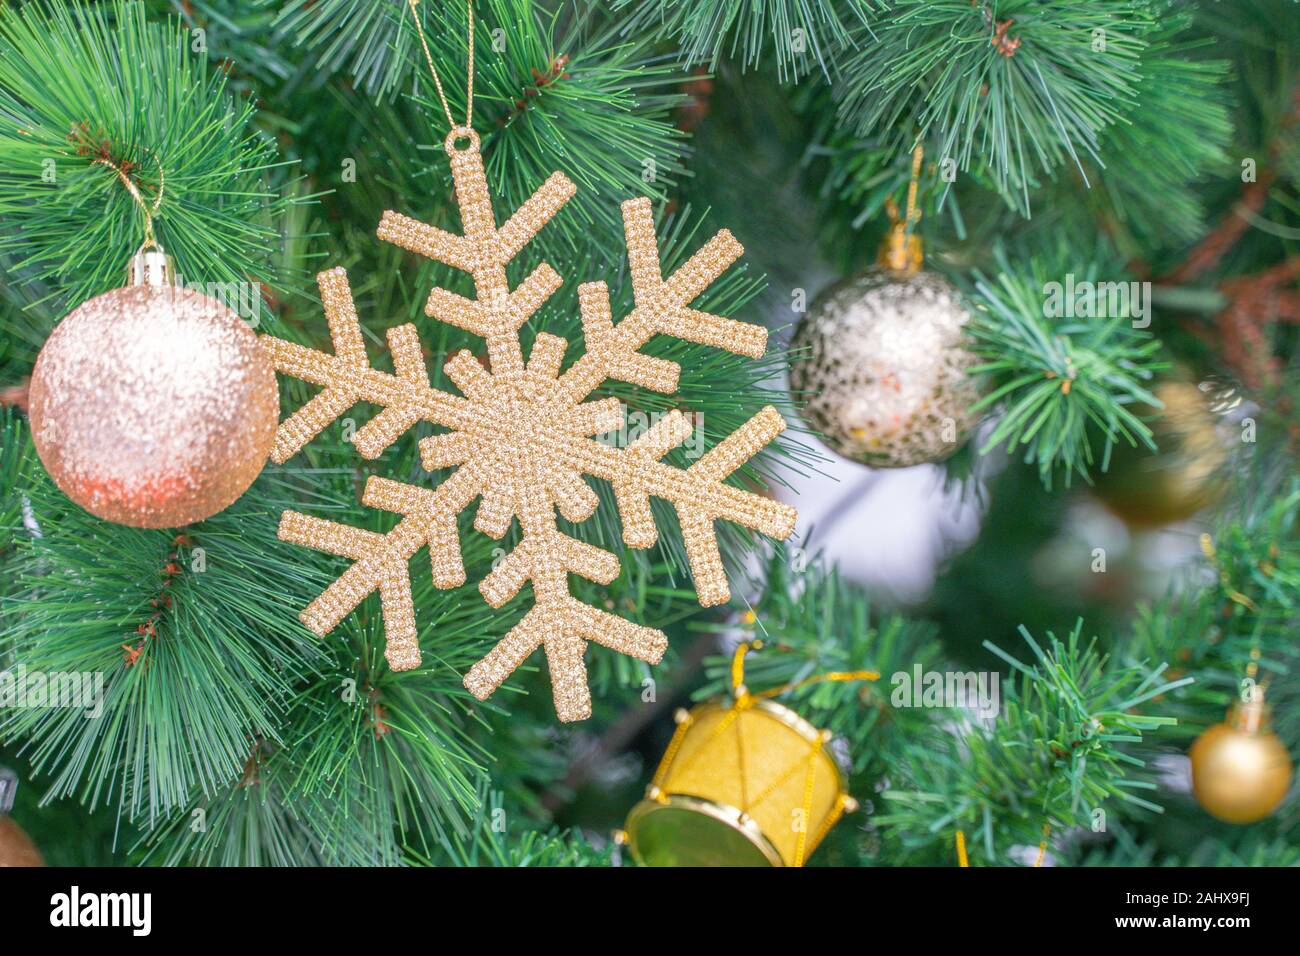 Beautiful Christmas star hanging from a decorated Christmas tree Stock Photo